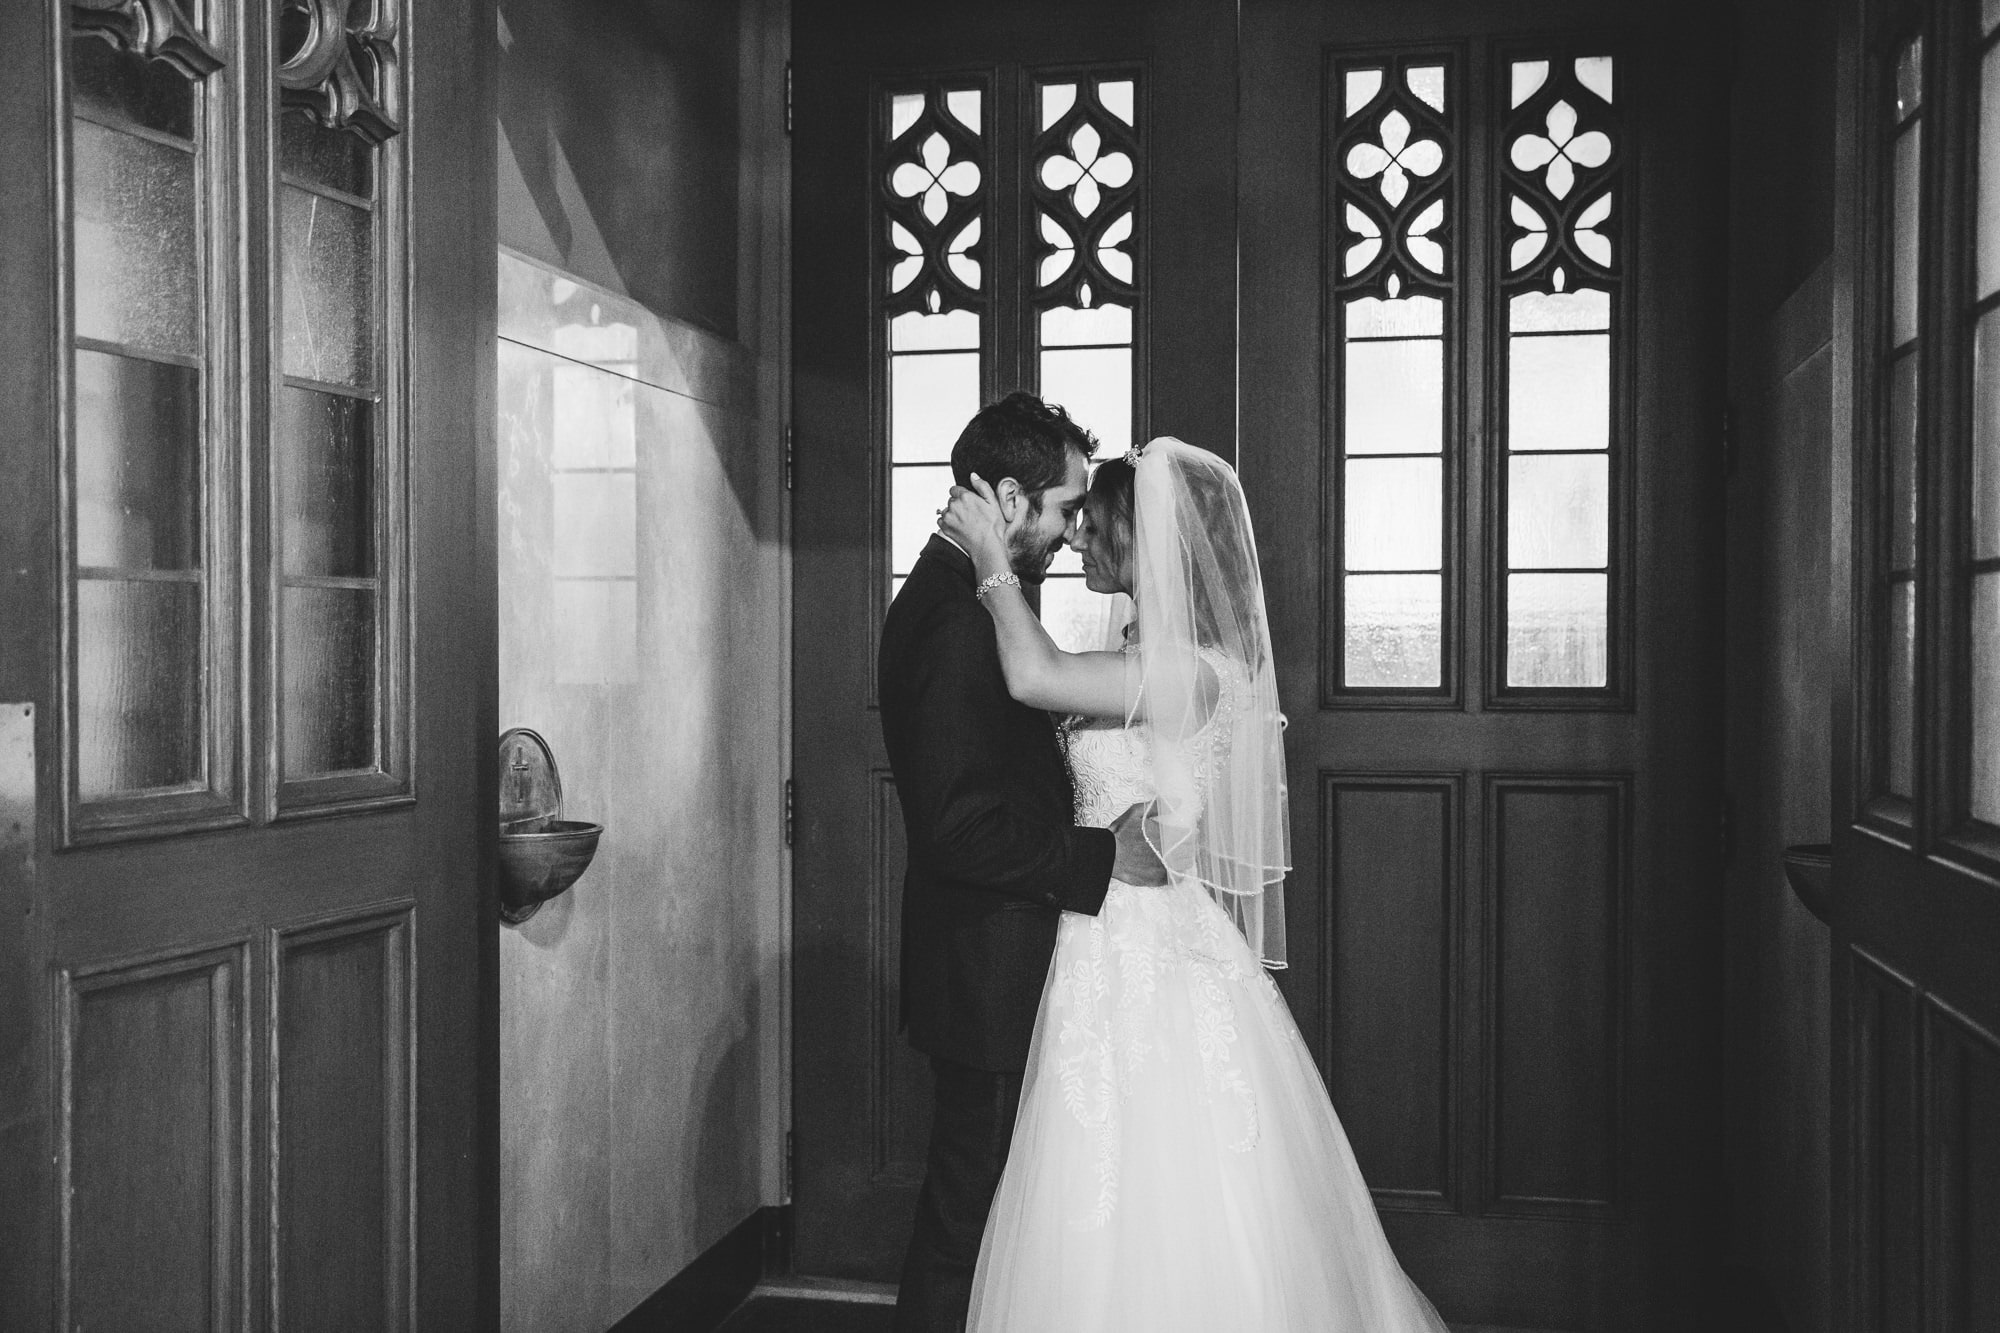 This documentary photograph of a bride and groom sharing an intimate moment after their ceremony is one of the best wedding photographs of 2016